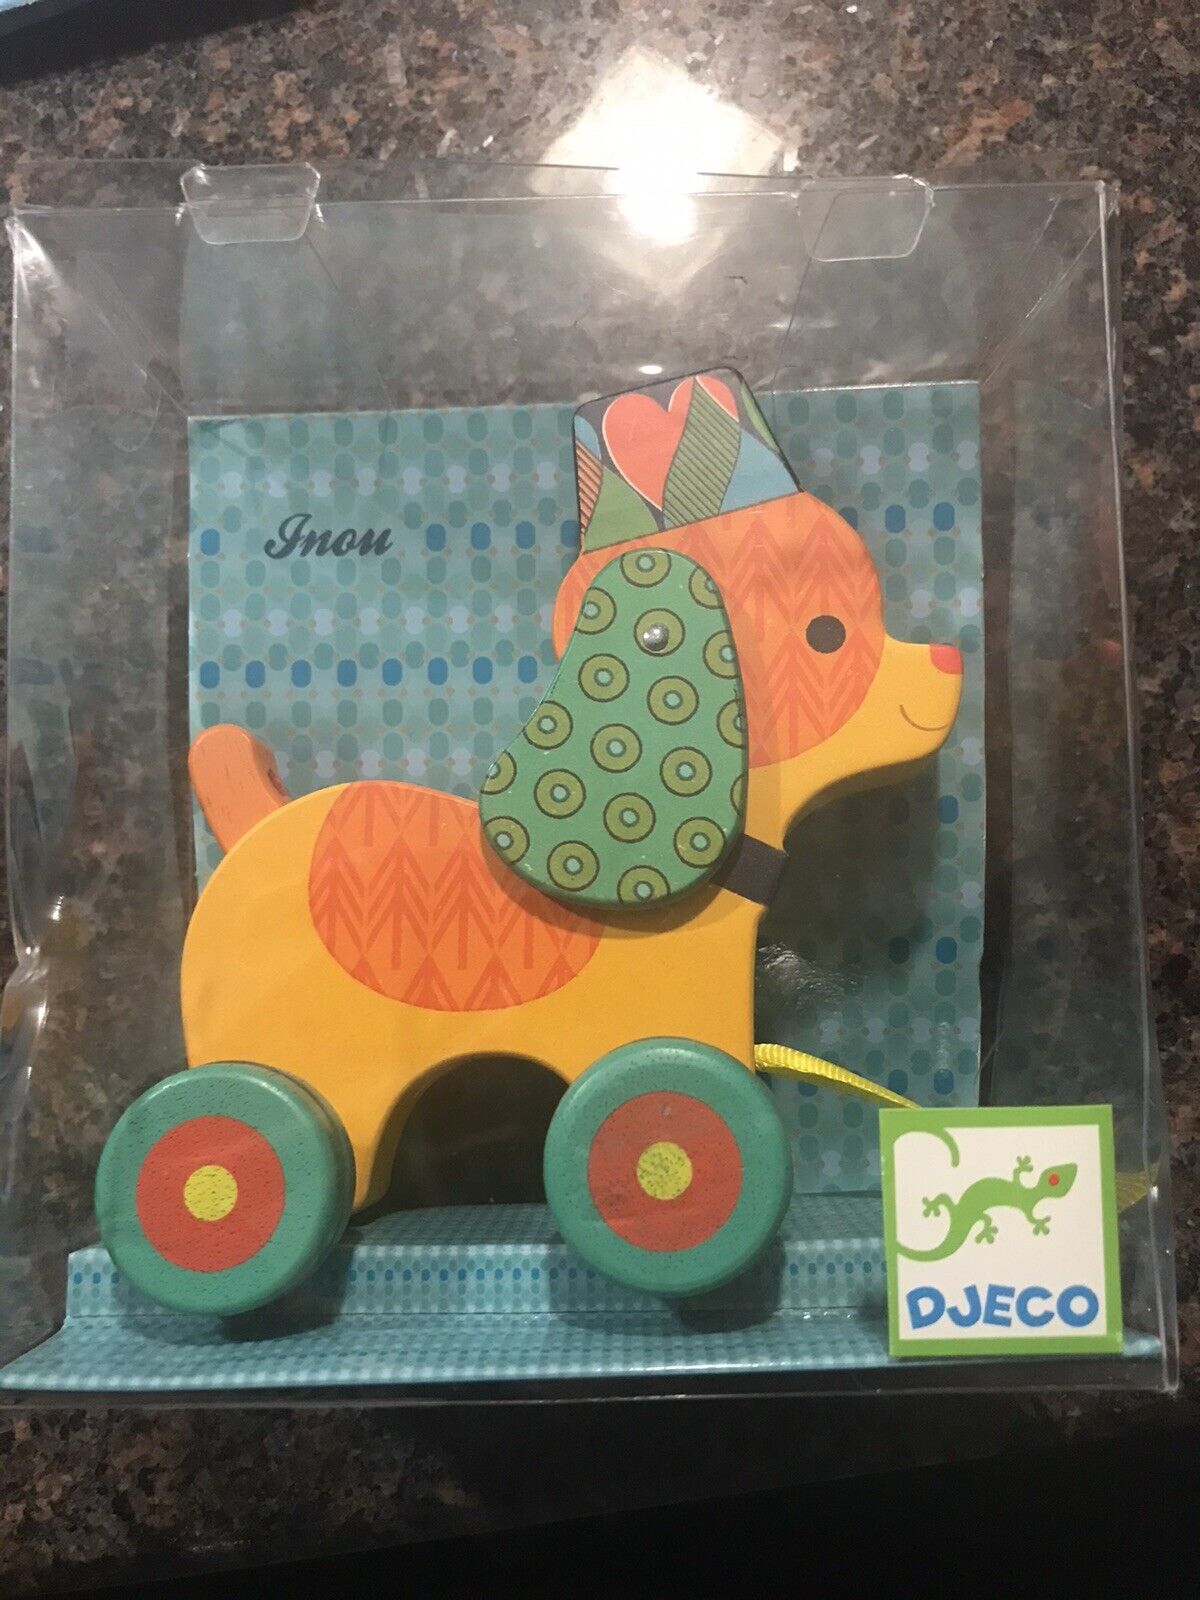 NEW Djeco Rate 若者の大愛商品 Dog Pull Toy Painted Wood 当店一番人気 along